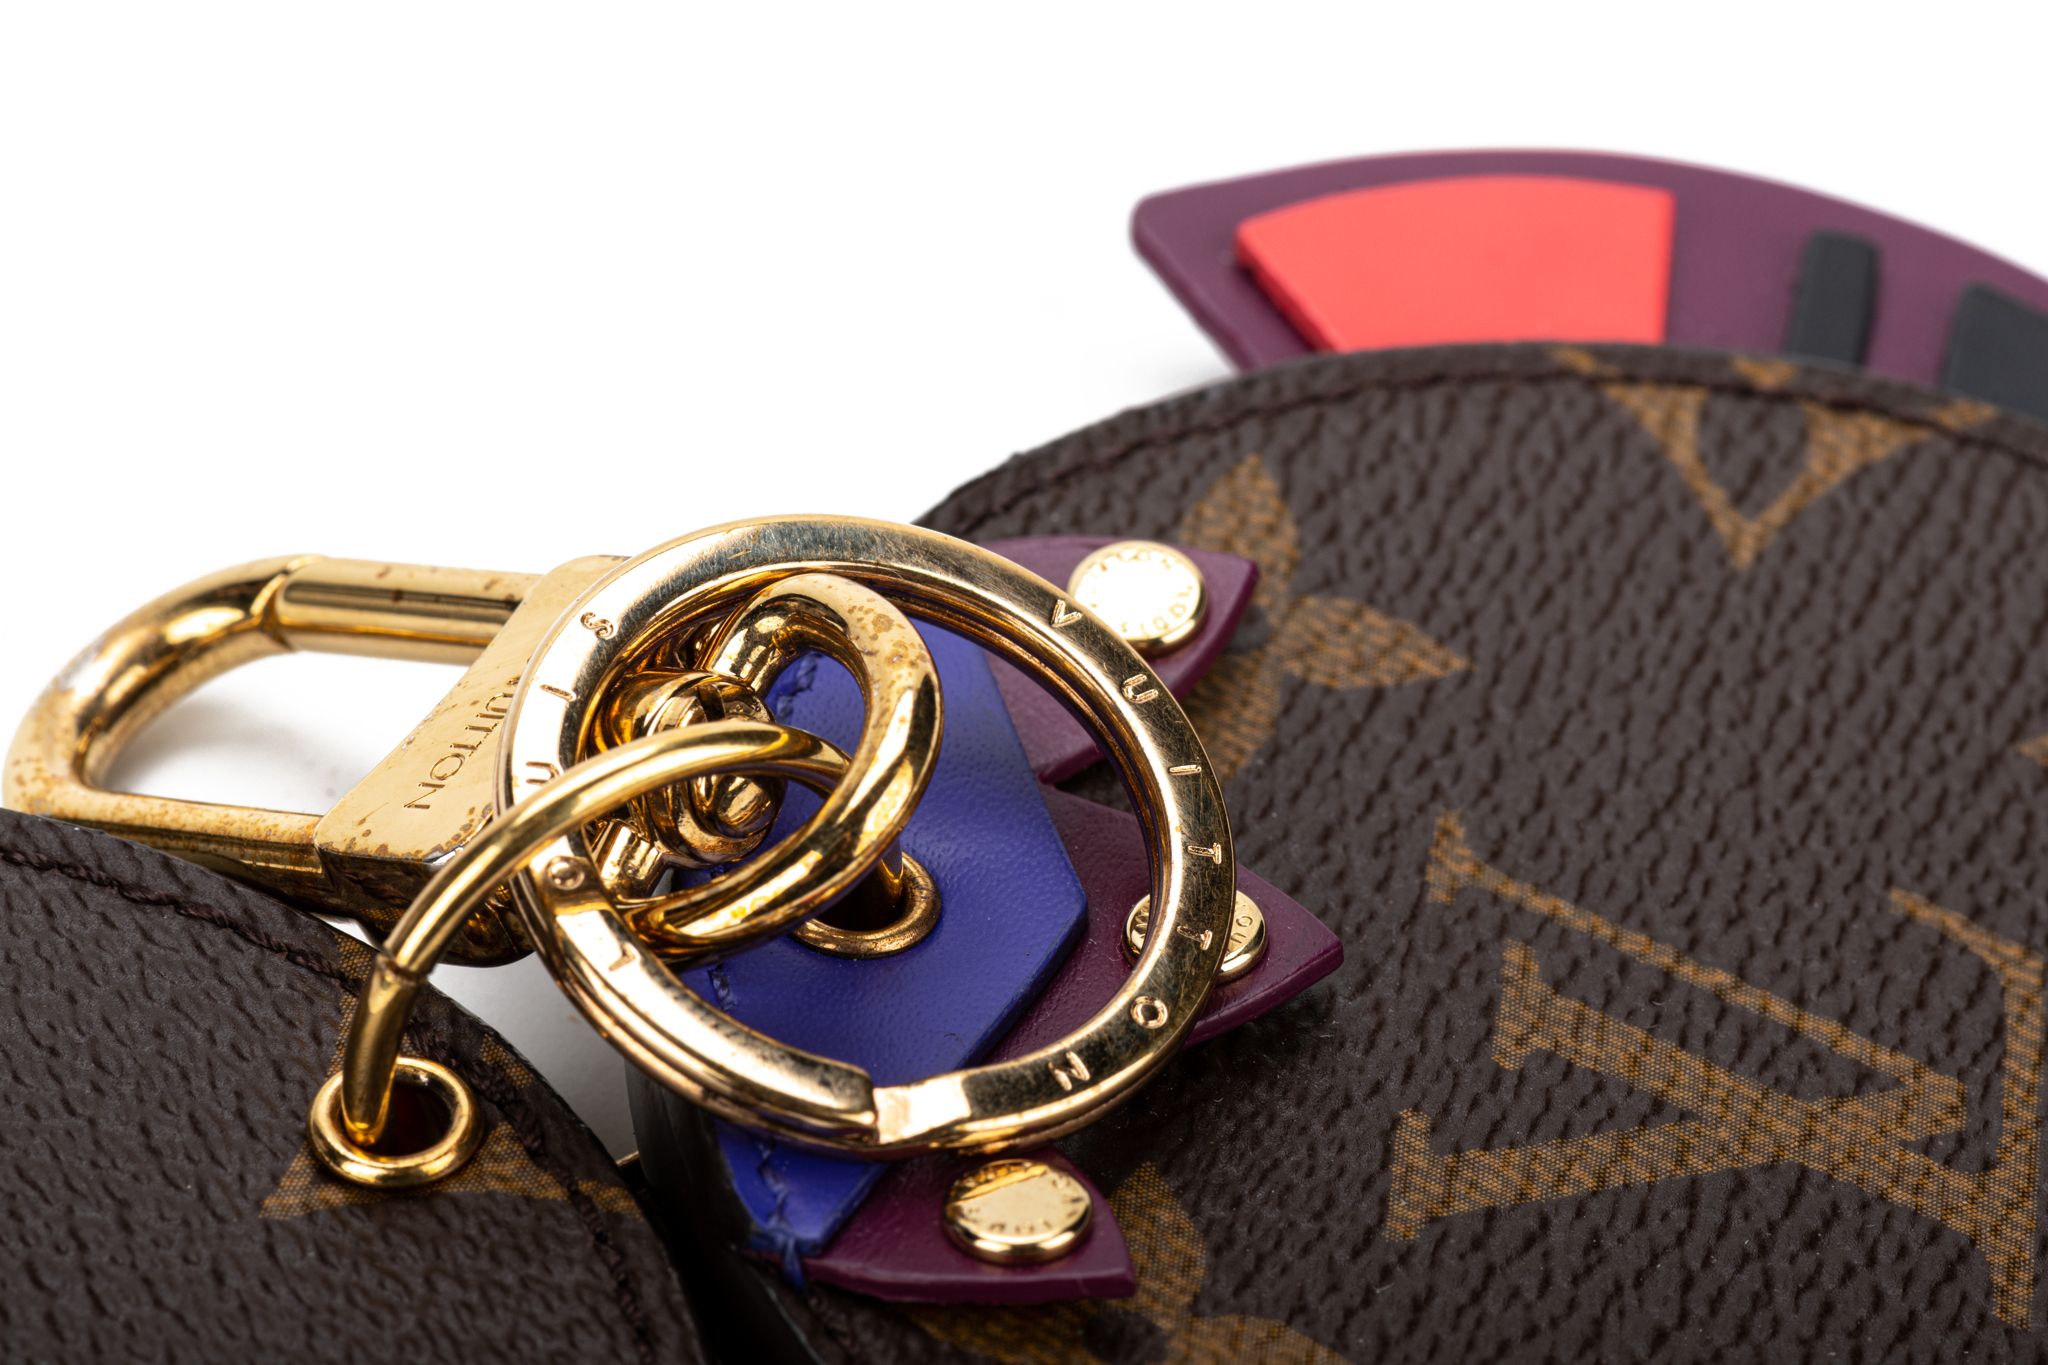 LOUIS VUITTON KEY HOLDER AND BAG CHARM VIVIENE HOLIDAY ANIMATION